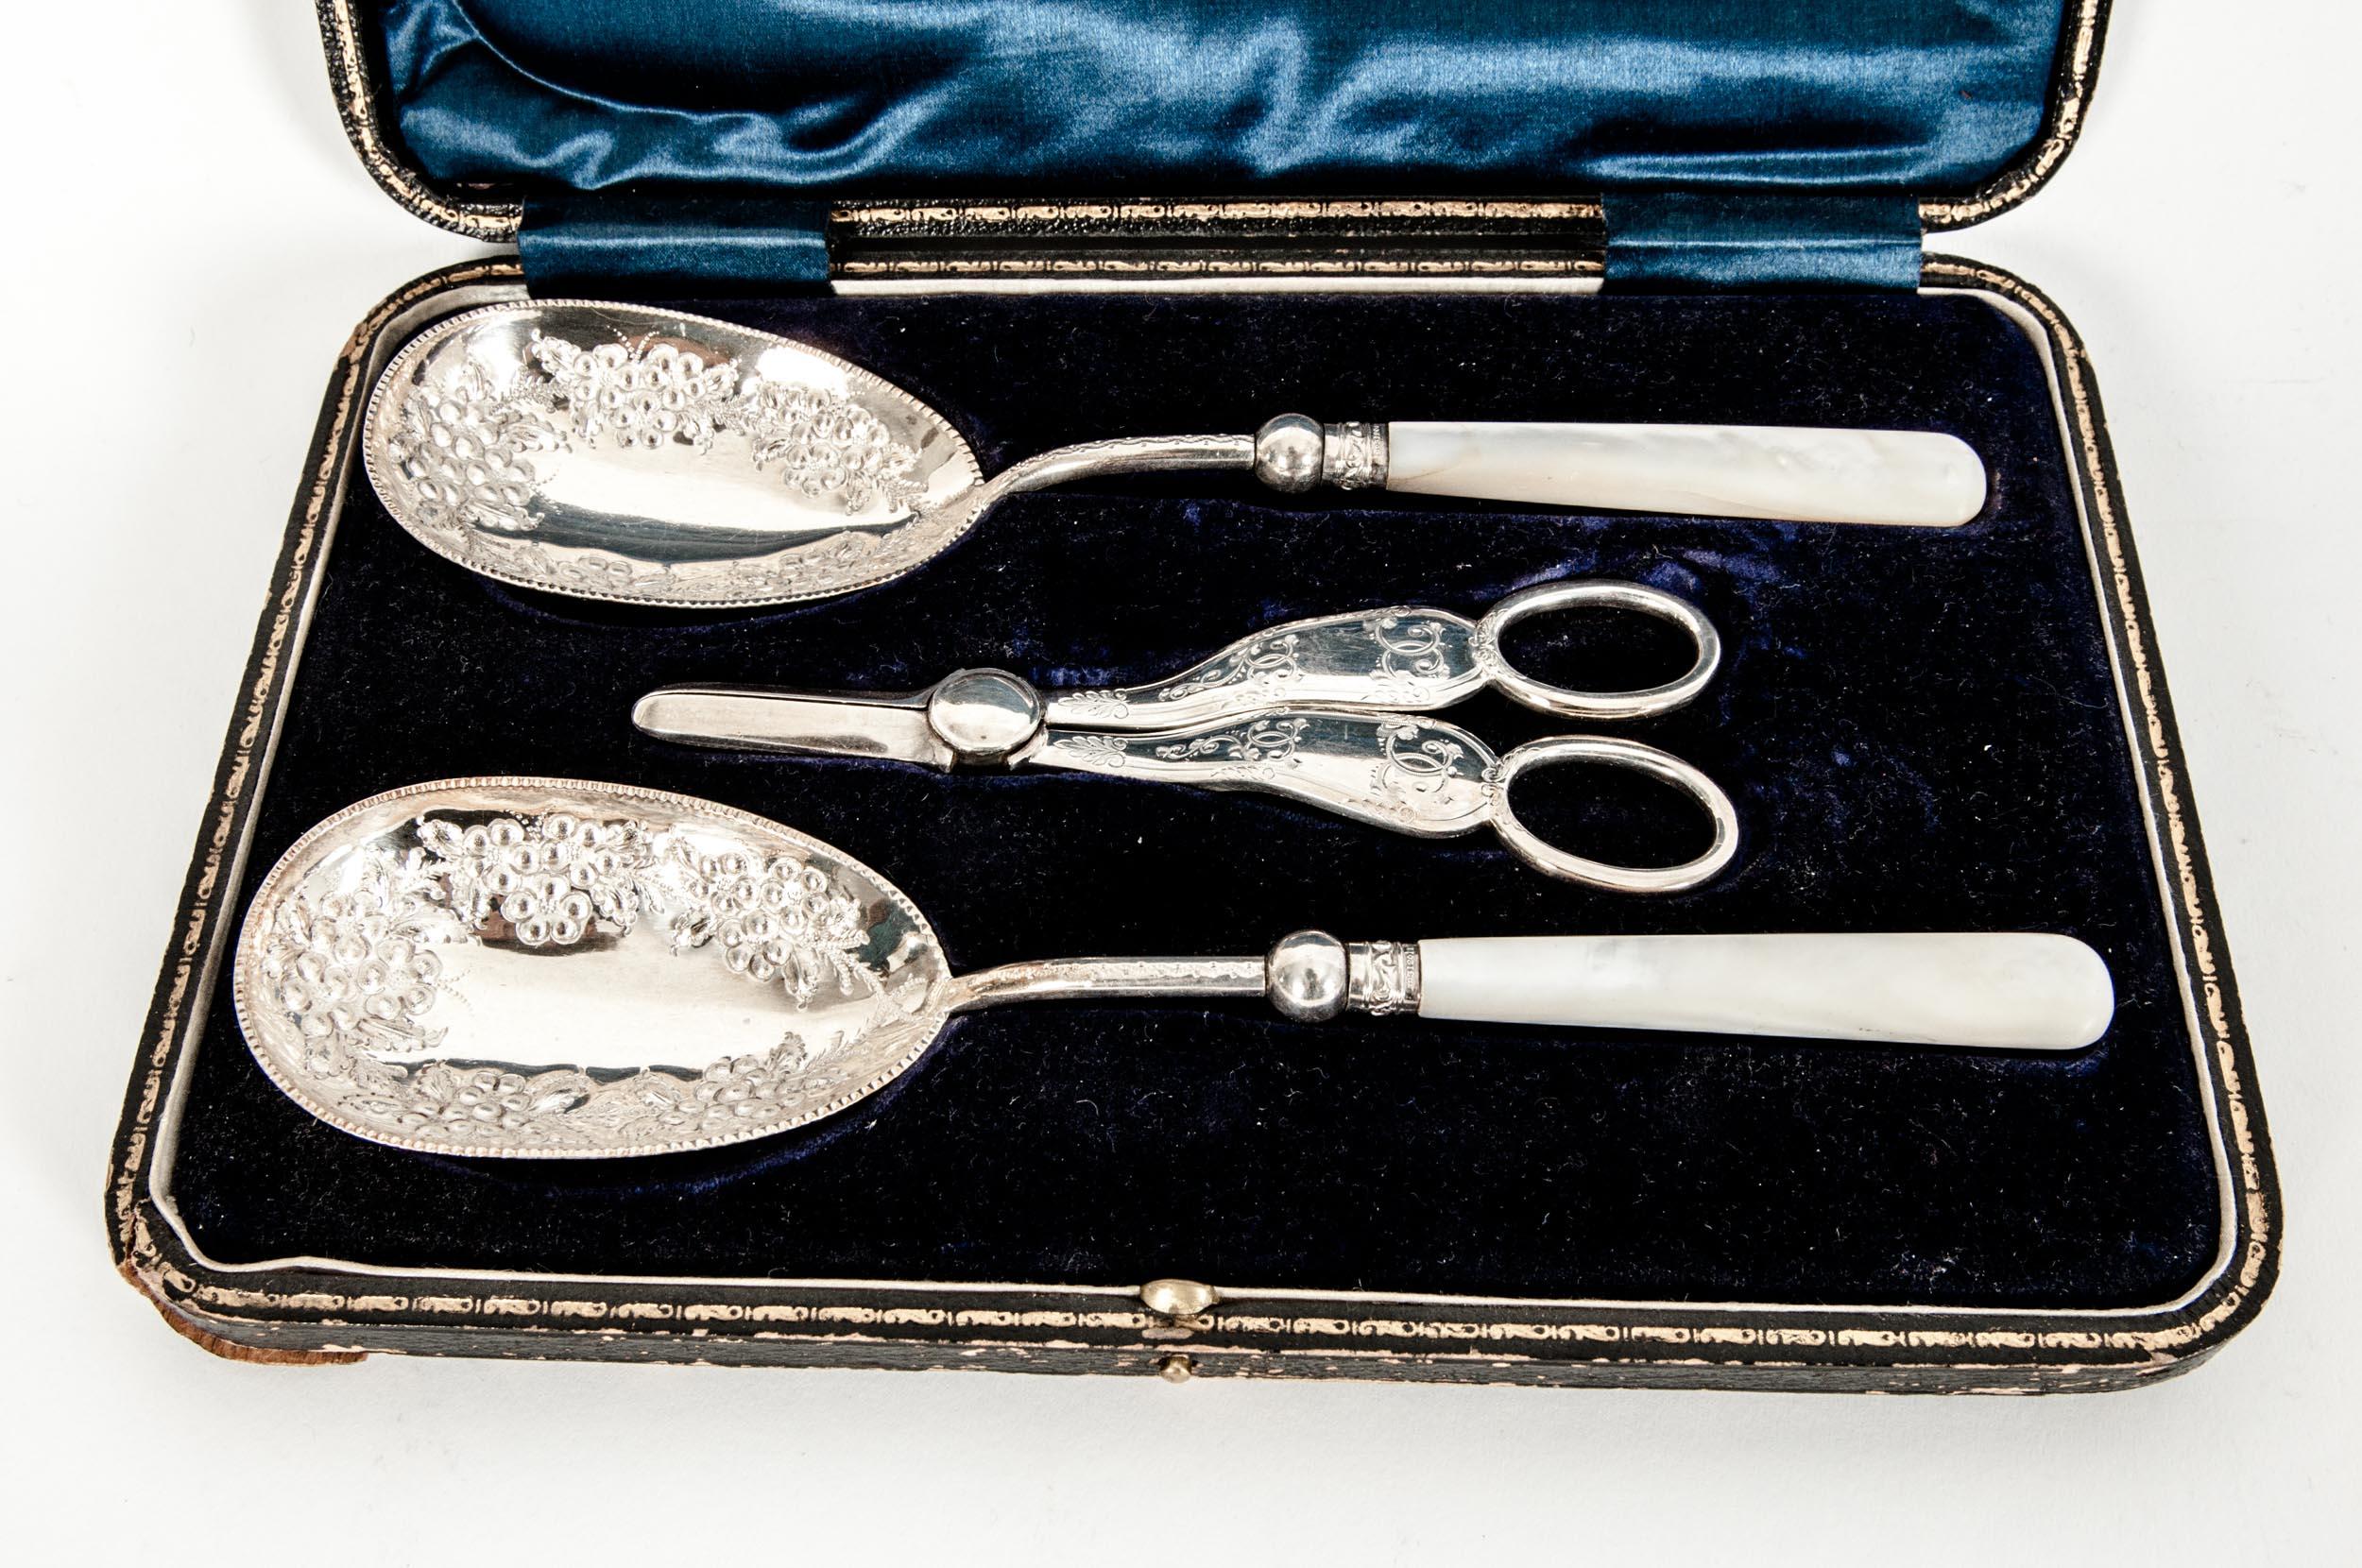 English silver plated set spoons and grape shears with pearl handles. The set is in great antique condition. Minor wear consistent with age. Maker's mark undersigned. The box measure about 10 inches long x 7 inches wide x 1.4 inches deep.